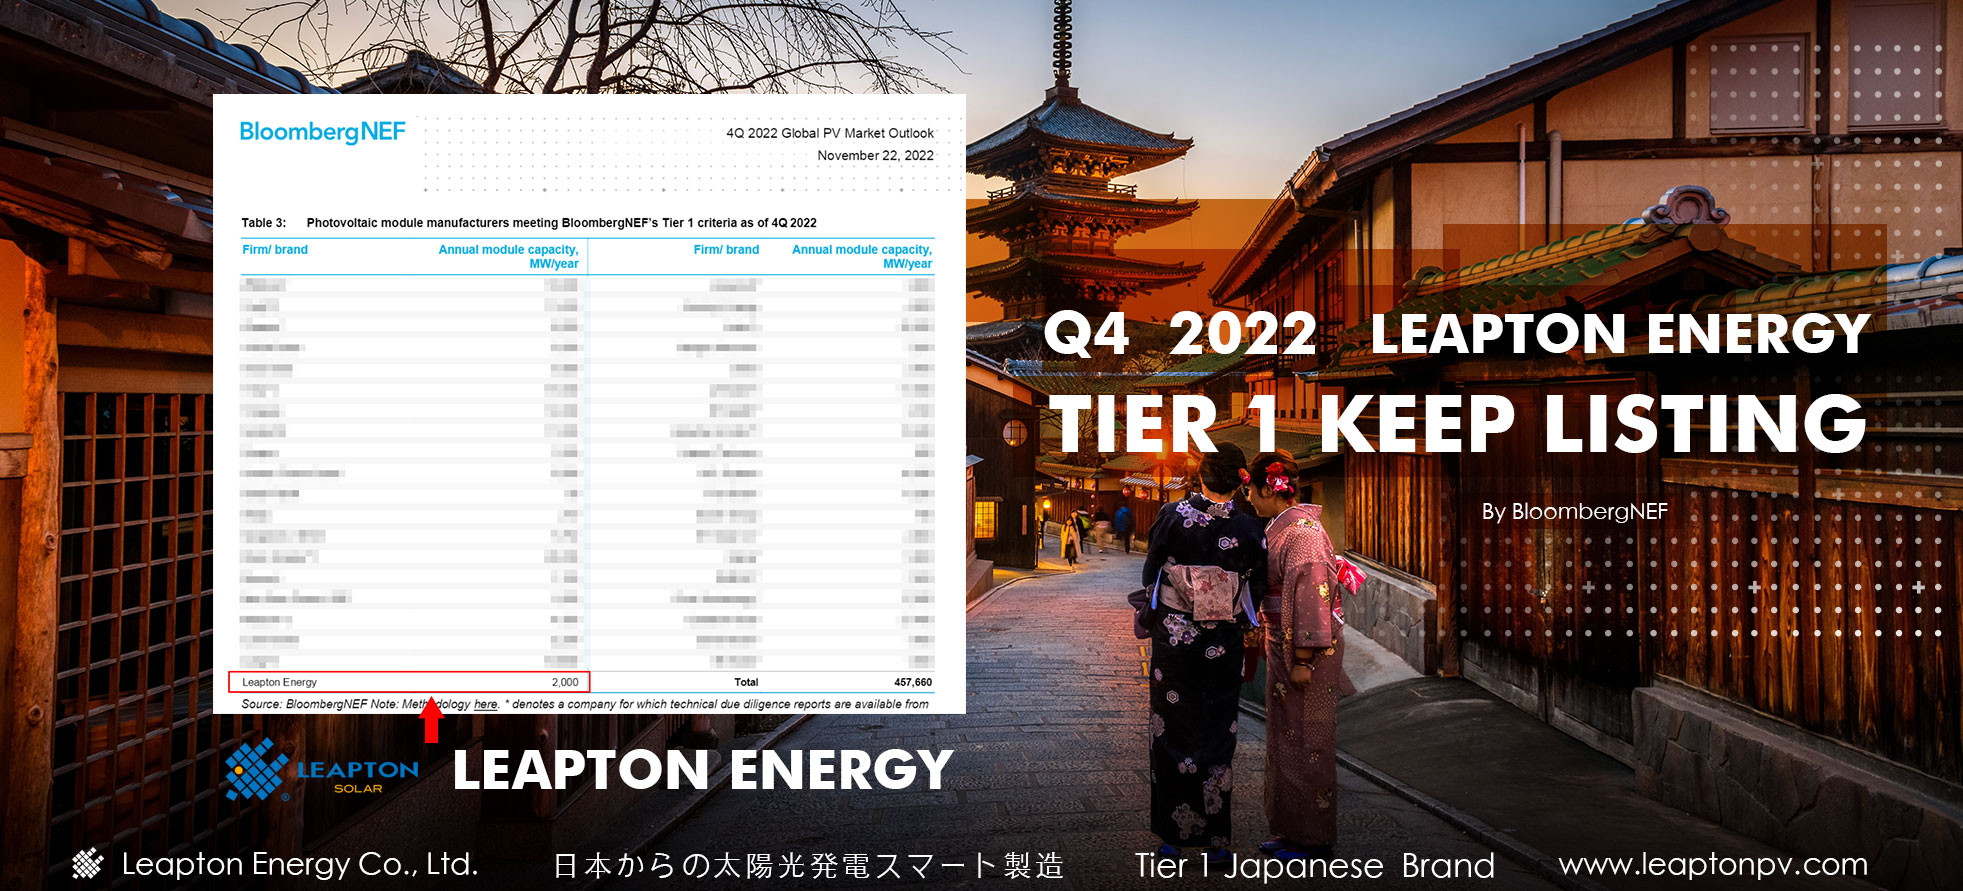 Leapton Energy Co., Ltd. Keep Tier 1 listing in Q4, 2022